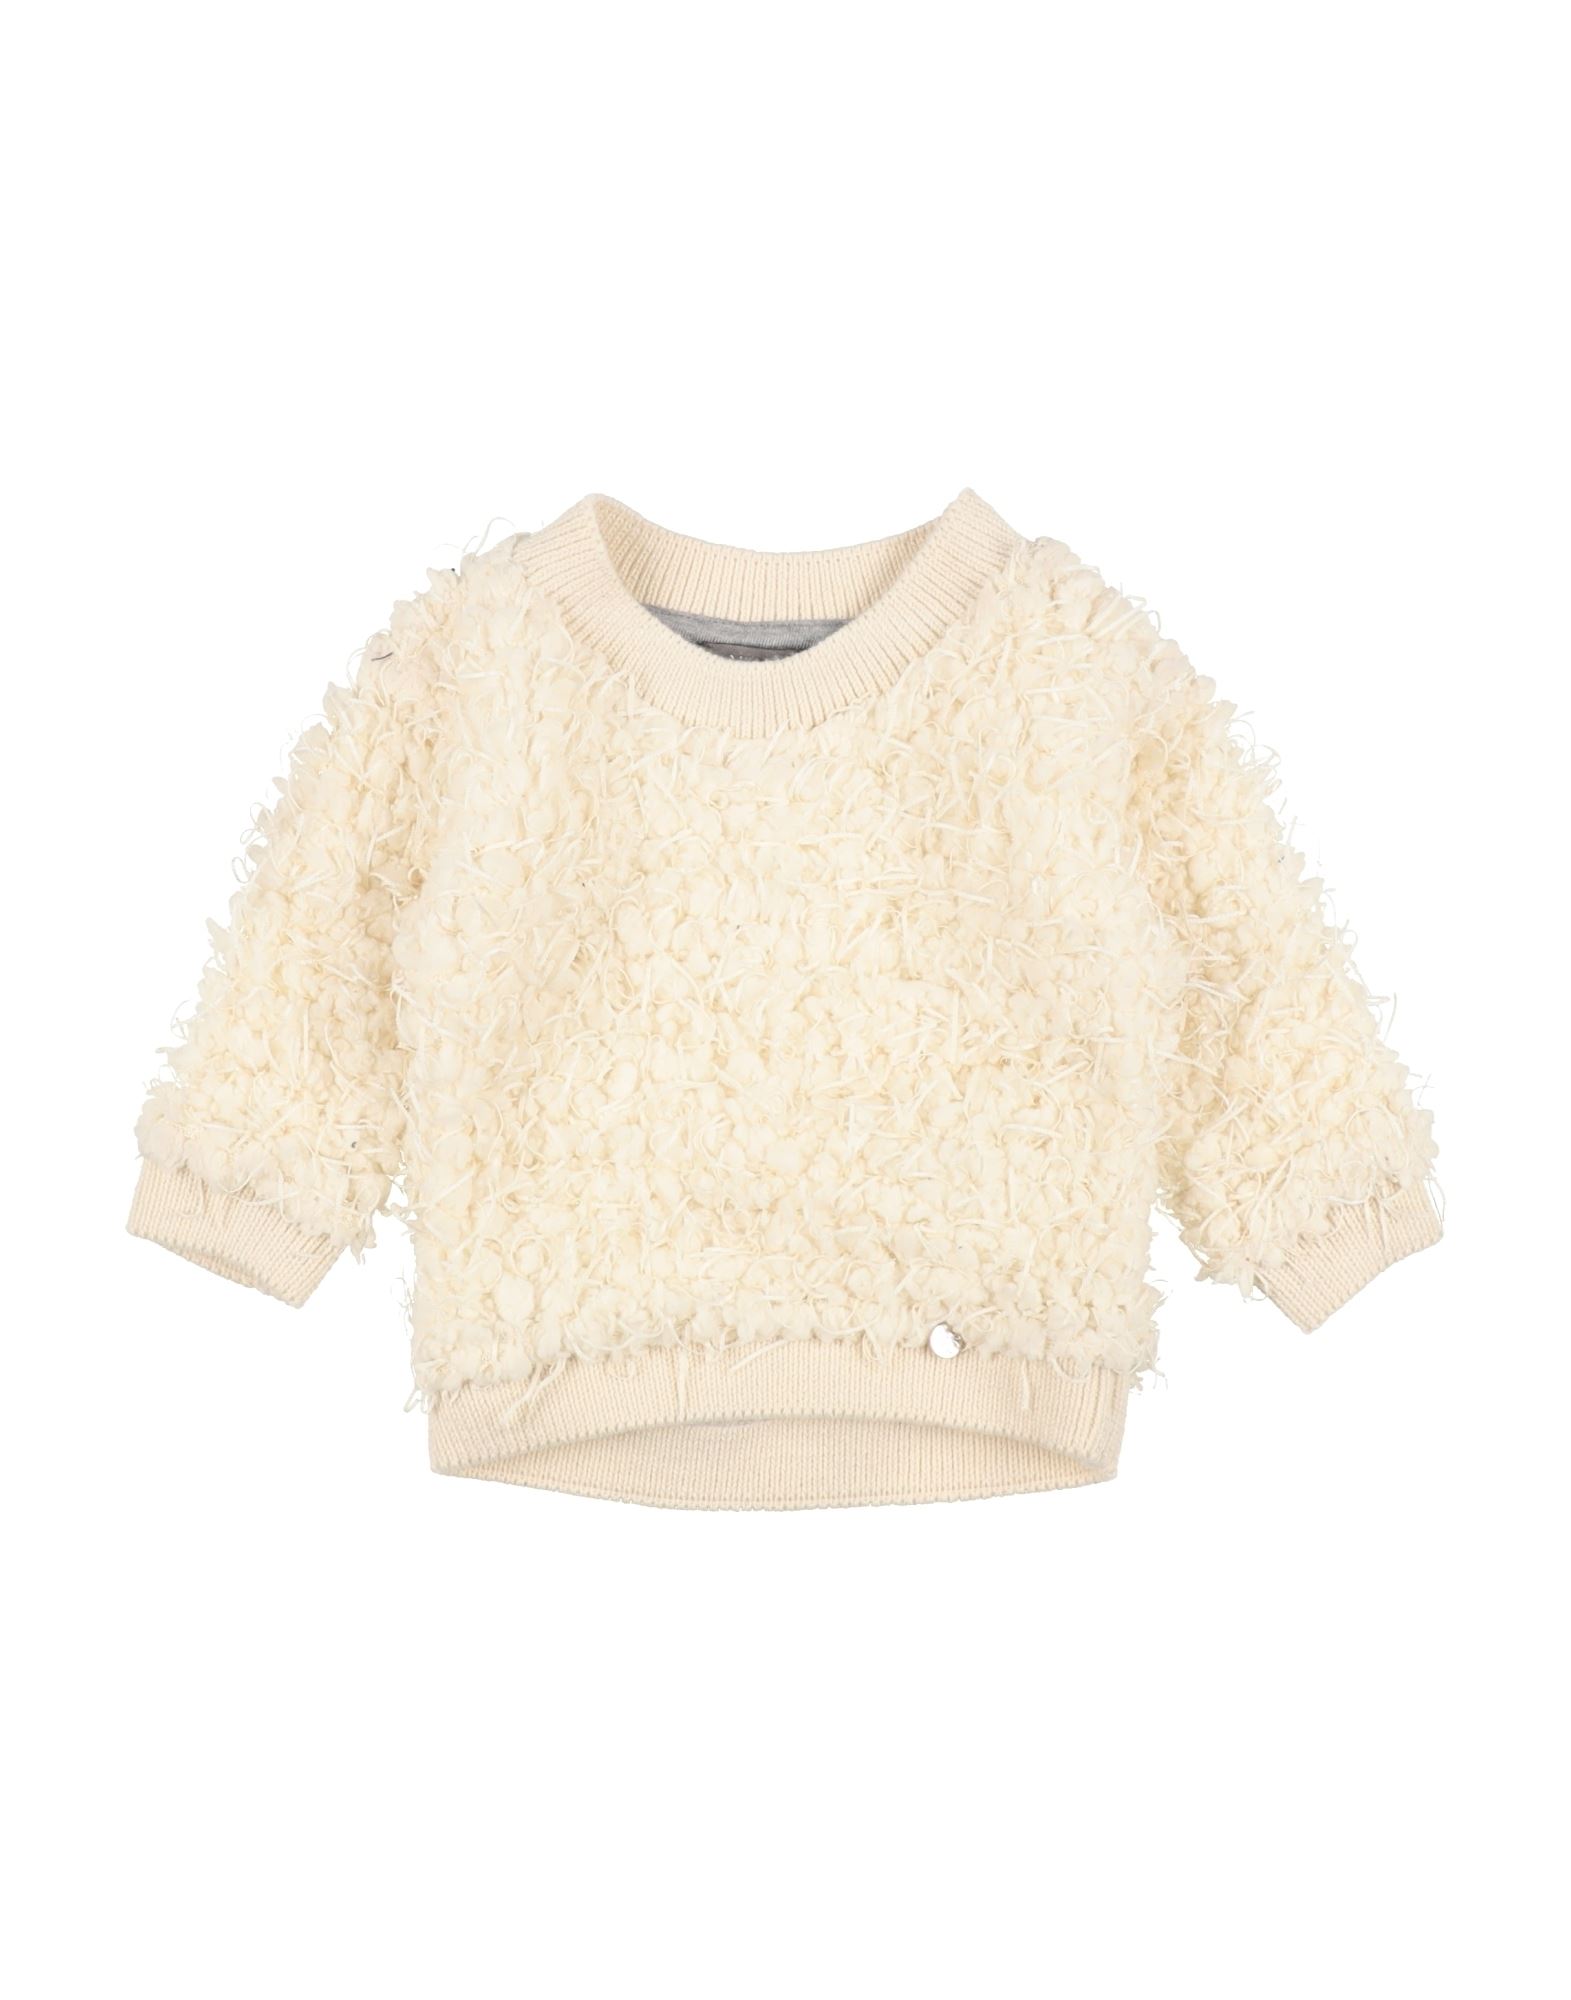 MICROBE by MISS GRANT Pullover Kinder Beige von MICROBE by MISS GRANT